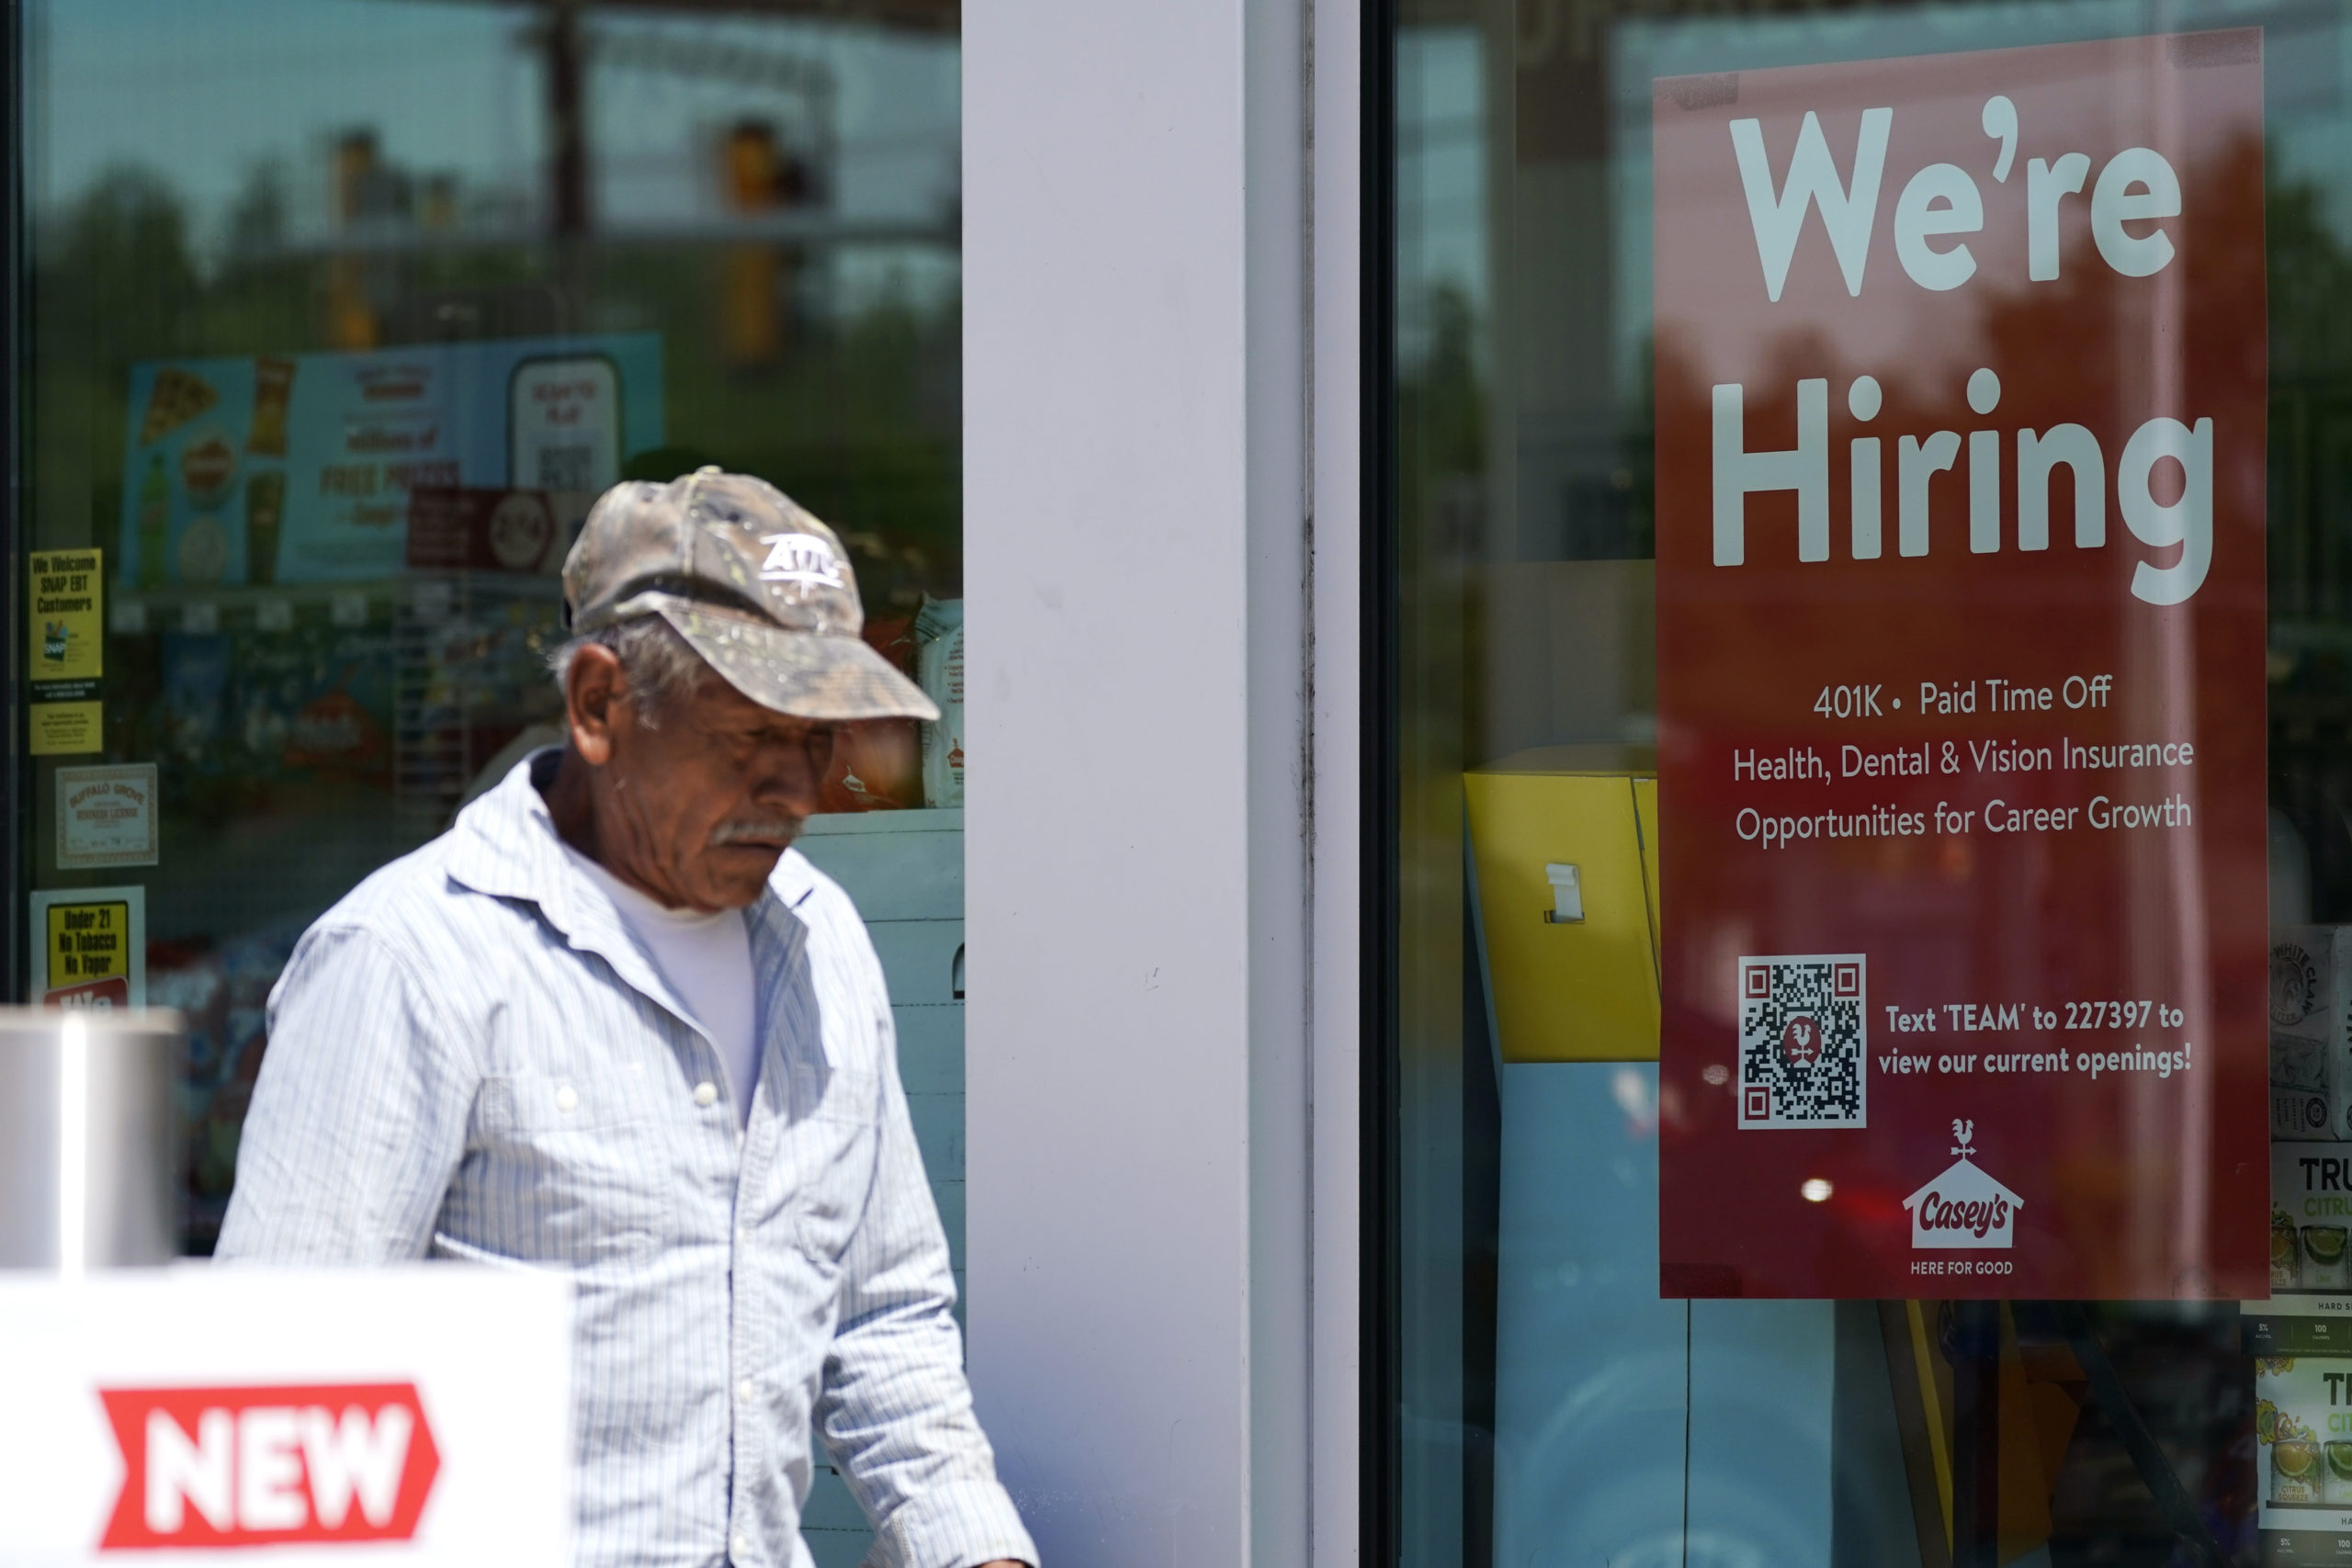 A customer walks past a hiring sign at a gas station in Buffalo Grove, Ill., June 9. More Americans applied for unemployment benefits last week, the fifth consecutive week that claims topped the 230,000 mark, the Labor Department reported.